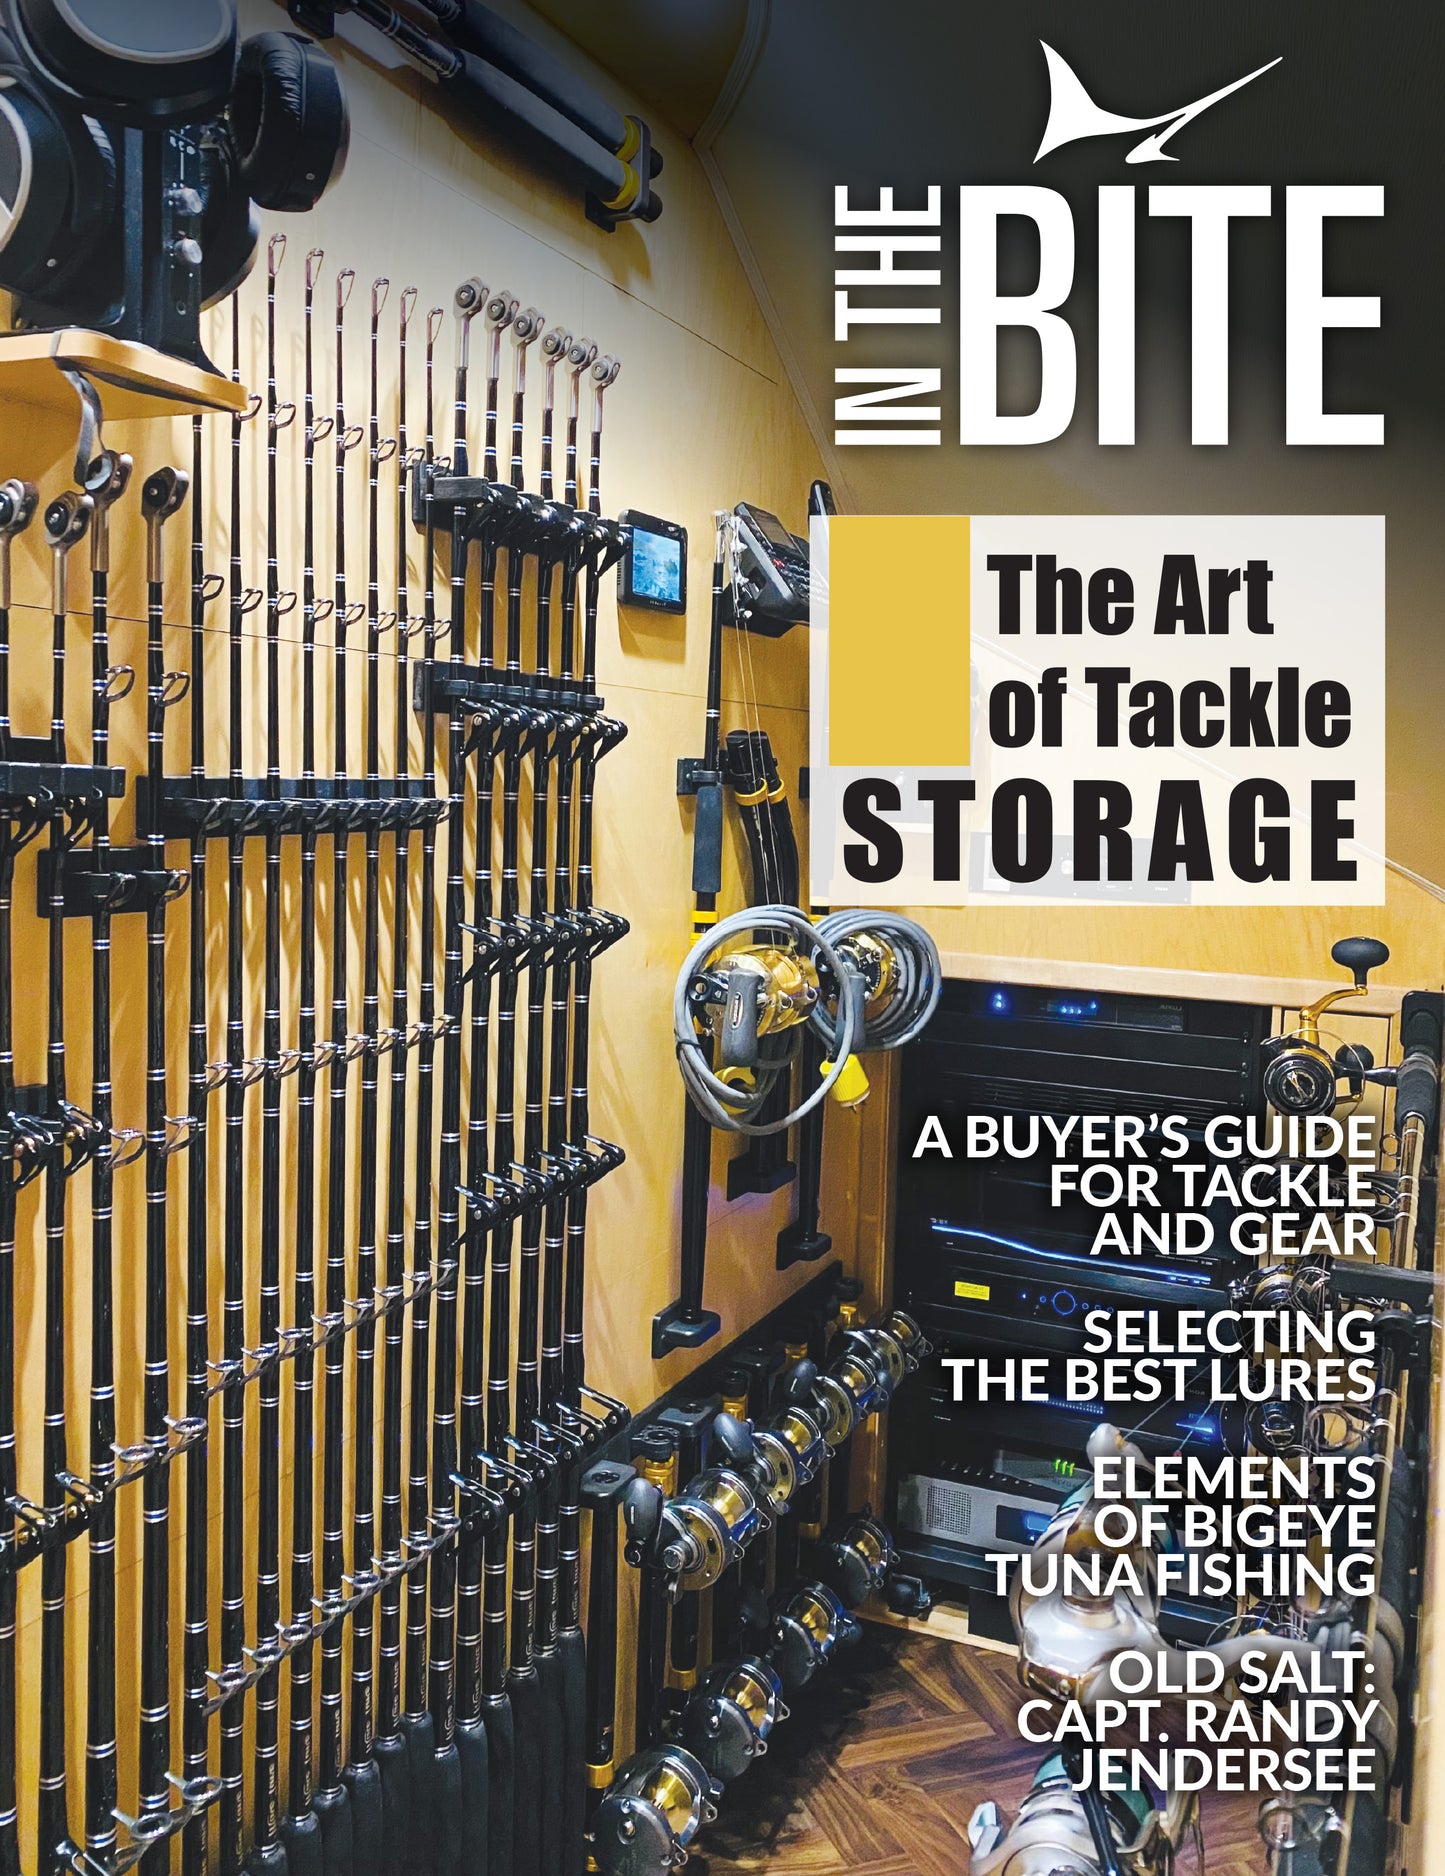 InTheBite Volume 21 Edition 03 April-May 2022